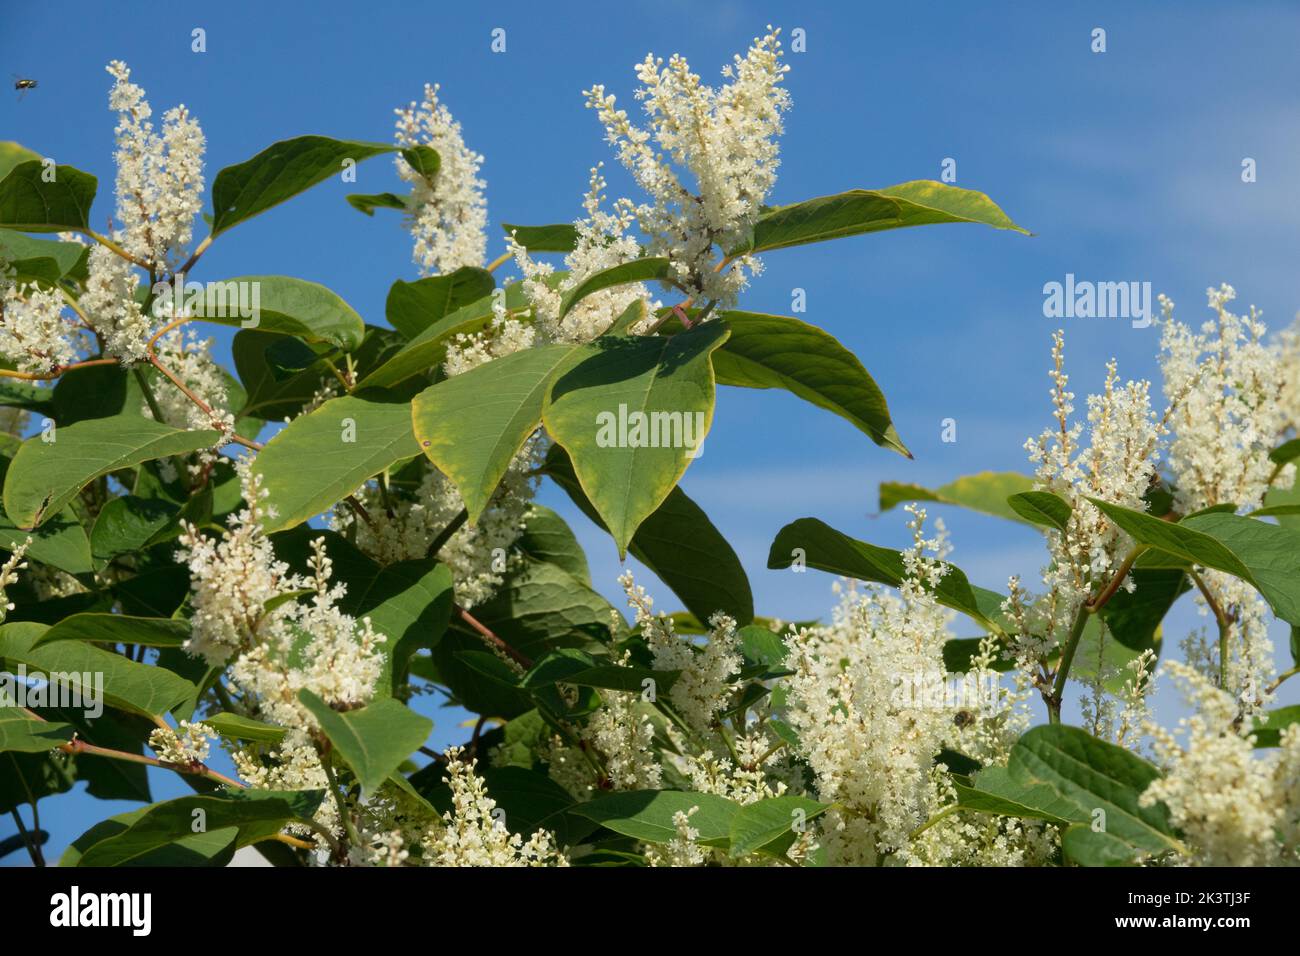 Japanese Knotweed, Fallopia japonica, Blooming, Reynoutria japonica  Beautiful flowers but tough invasive plant Stock Photo